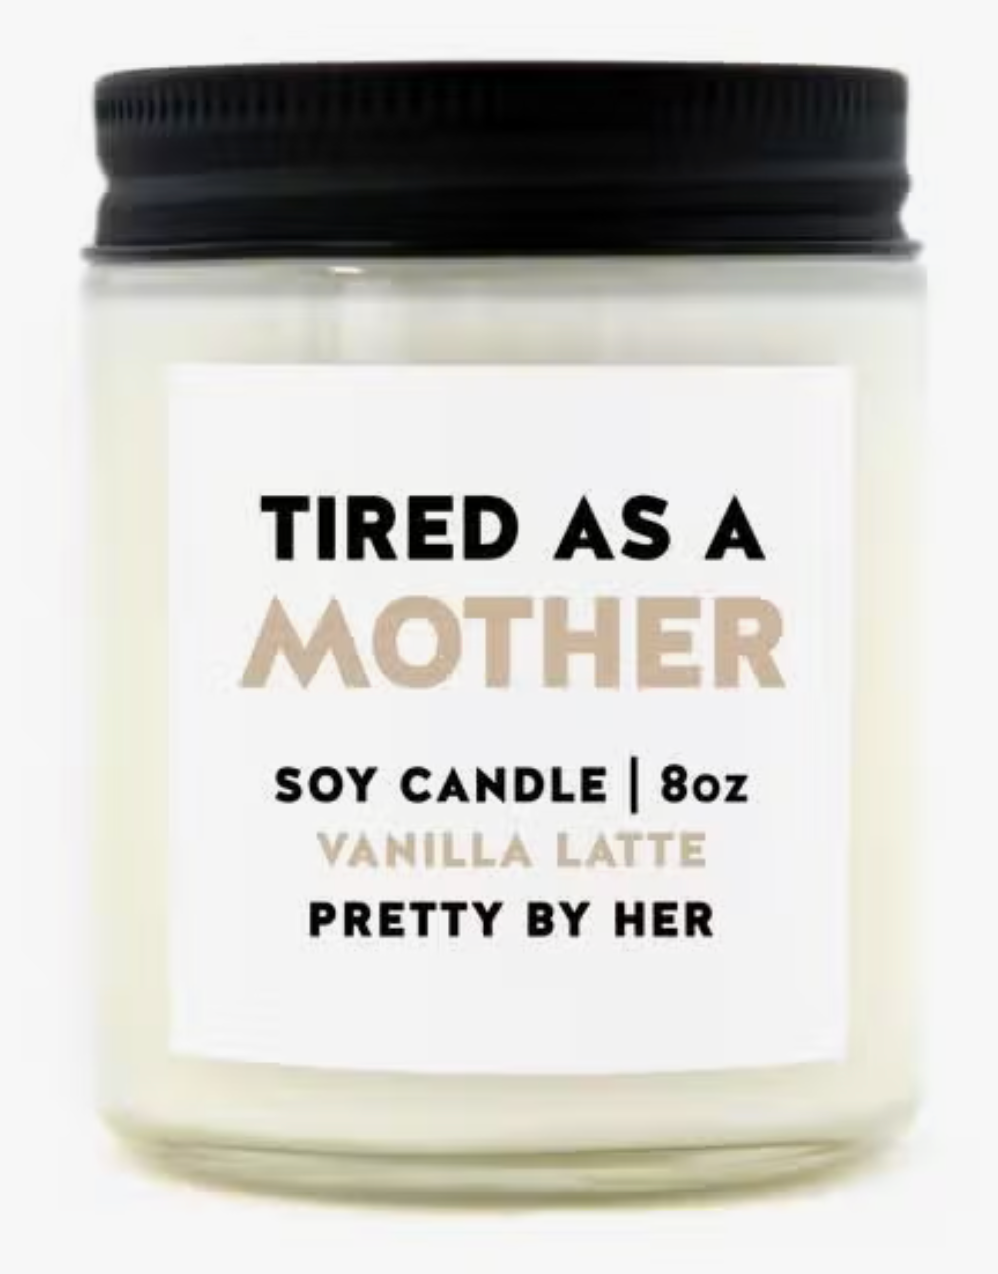 Tired as a Mother | Soy Wax Candle